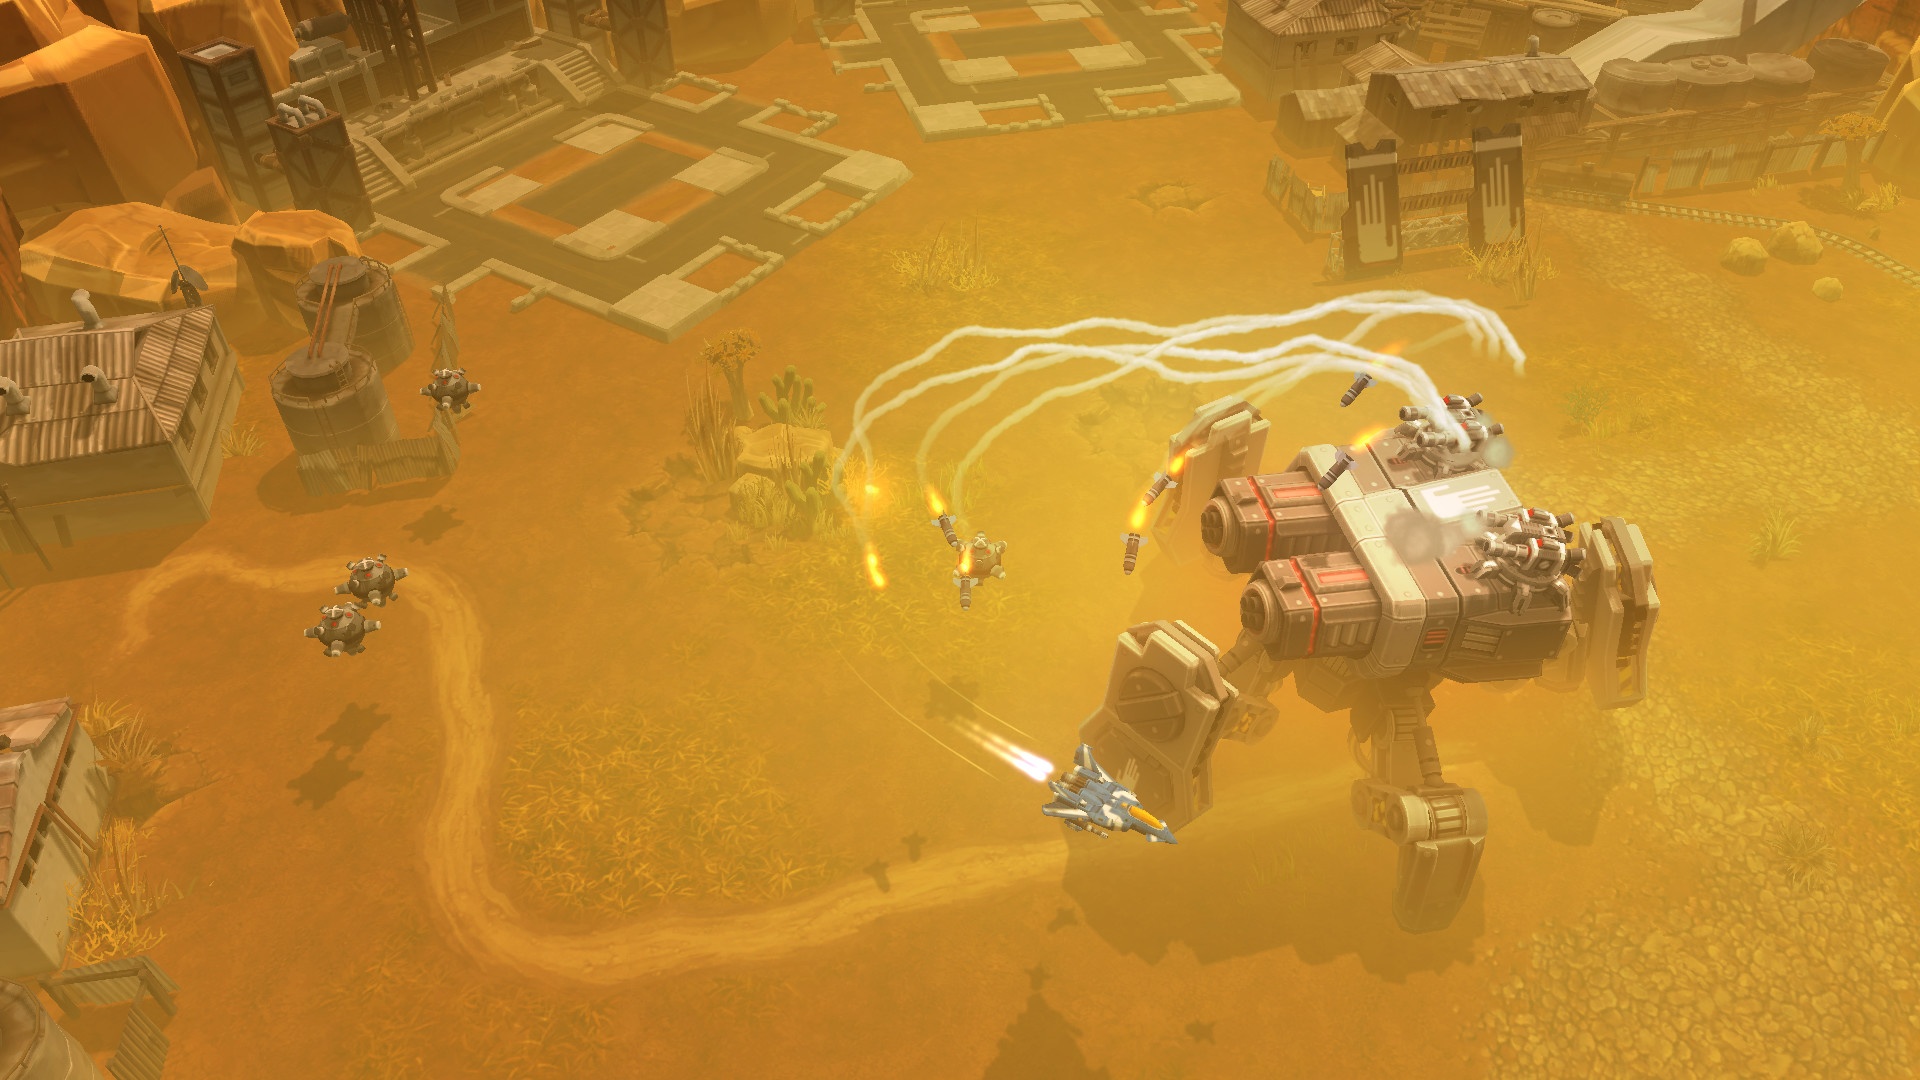 Transforming robot ARPG AirMech Wastelands hits Early Access